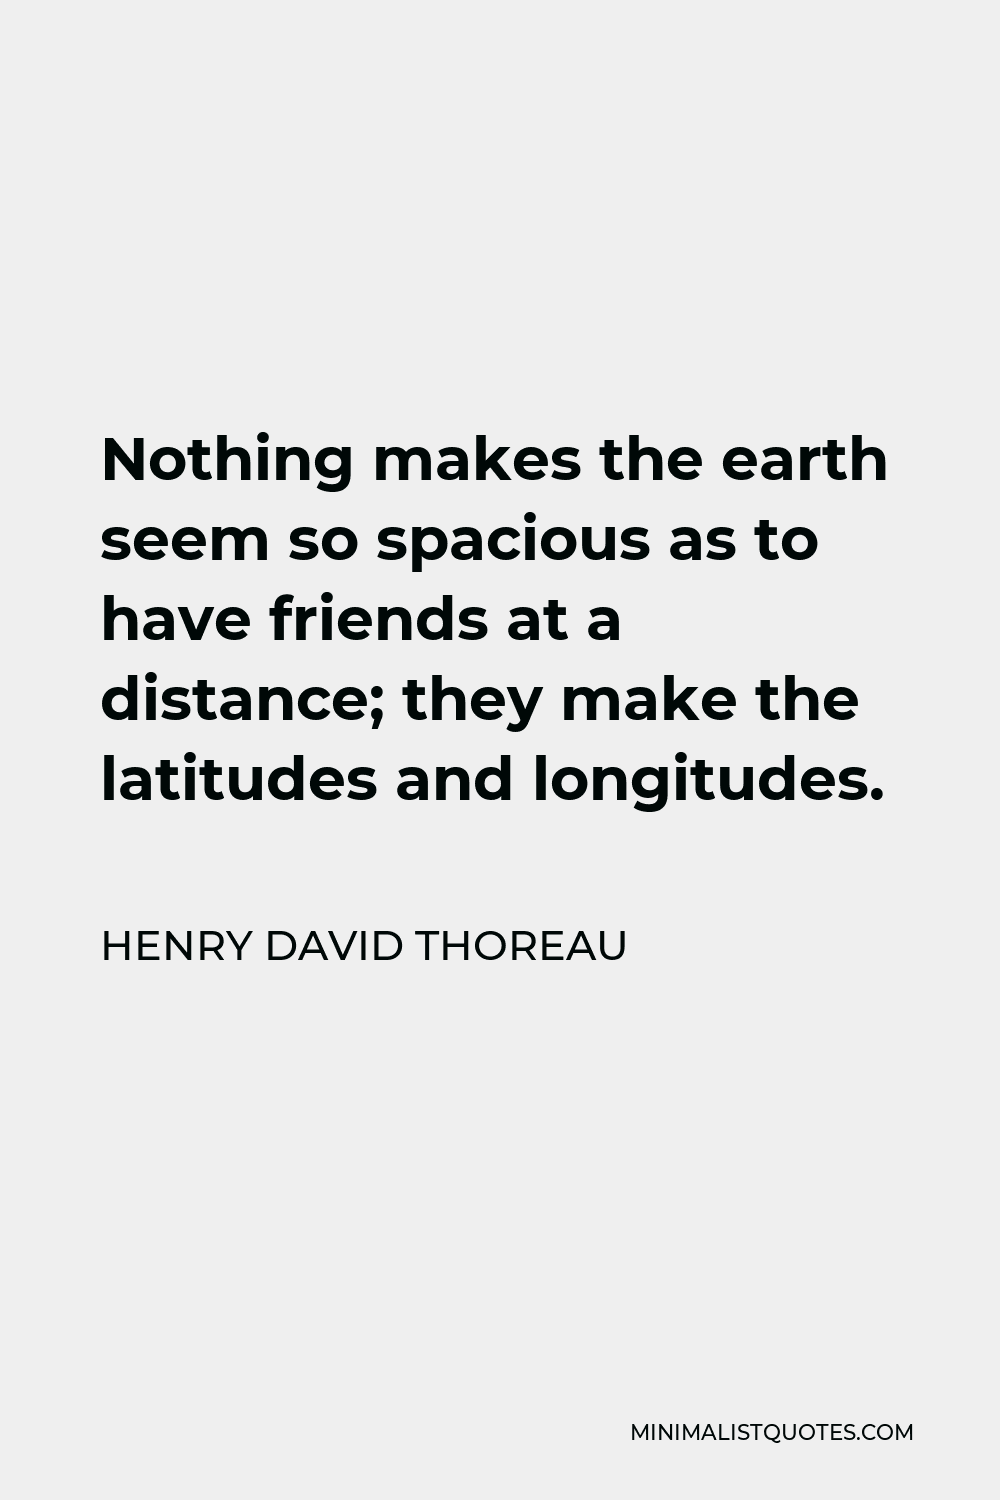 Henry David Thoreau Quote - Nothing makes the earth seem so spacious as to have friends at a distance; they make the latitudes and longitudes.